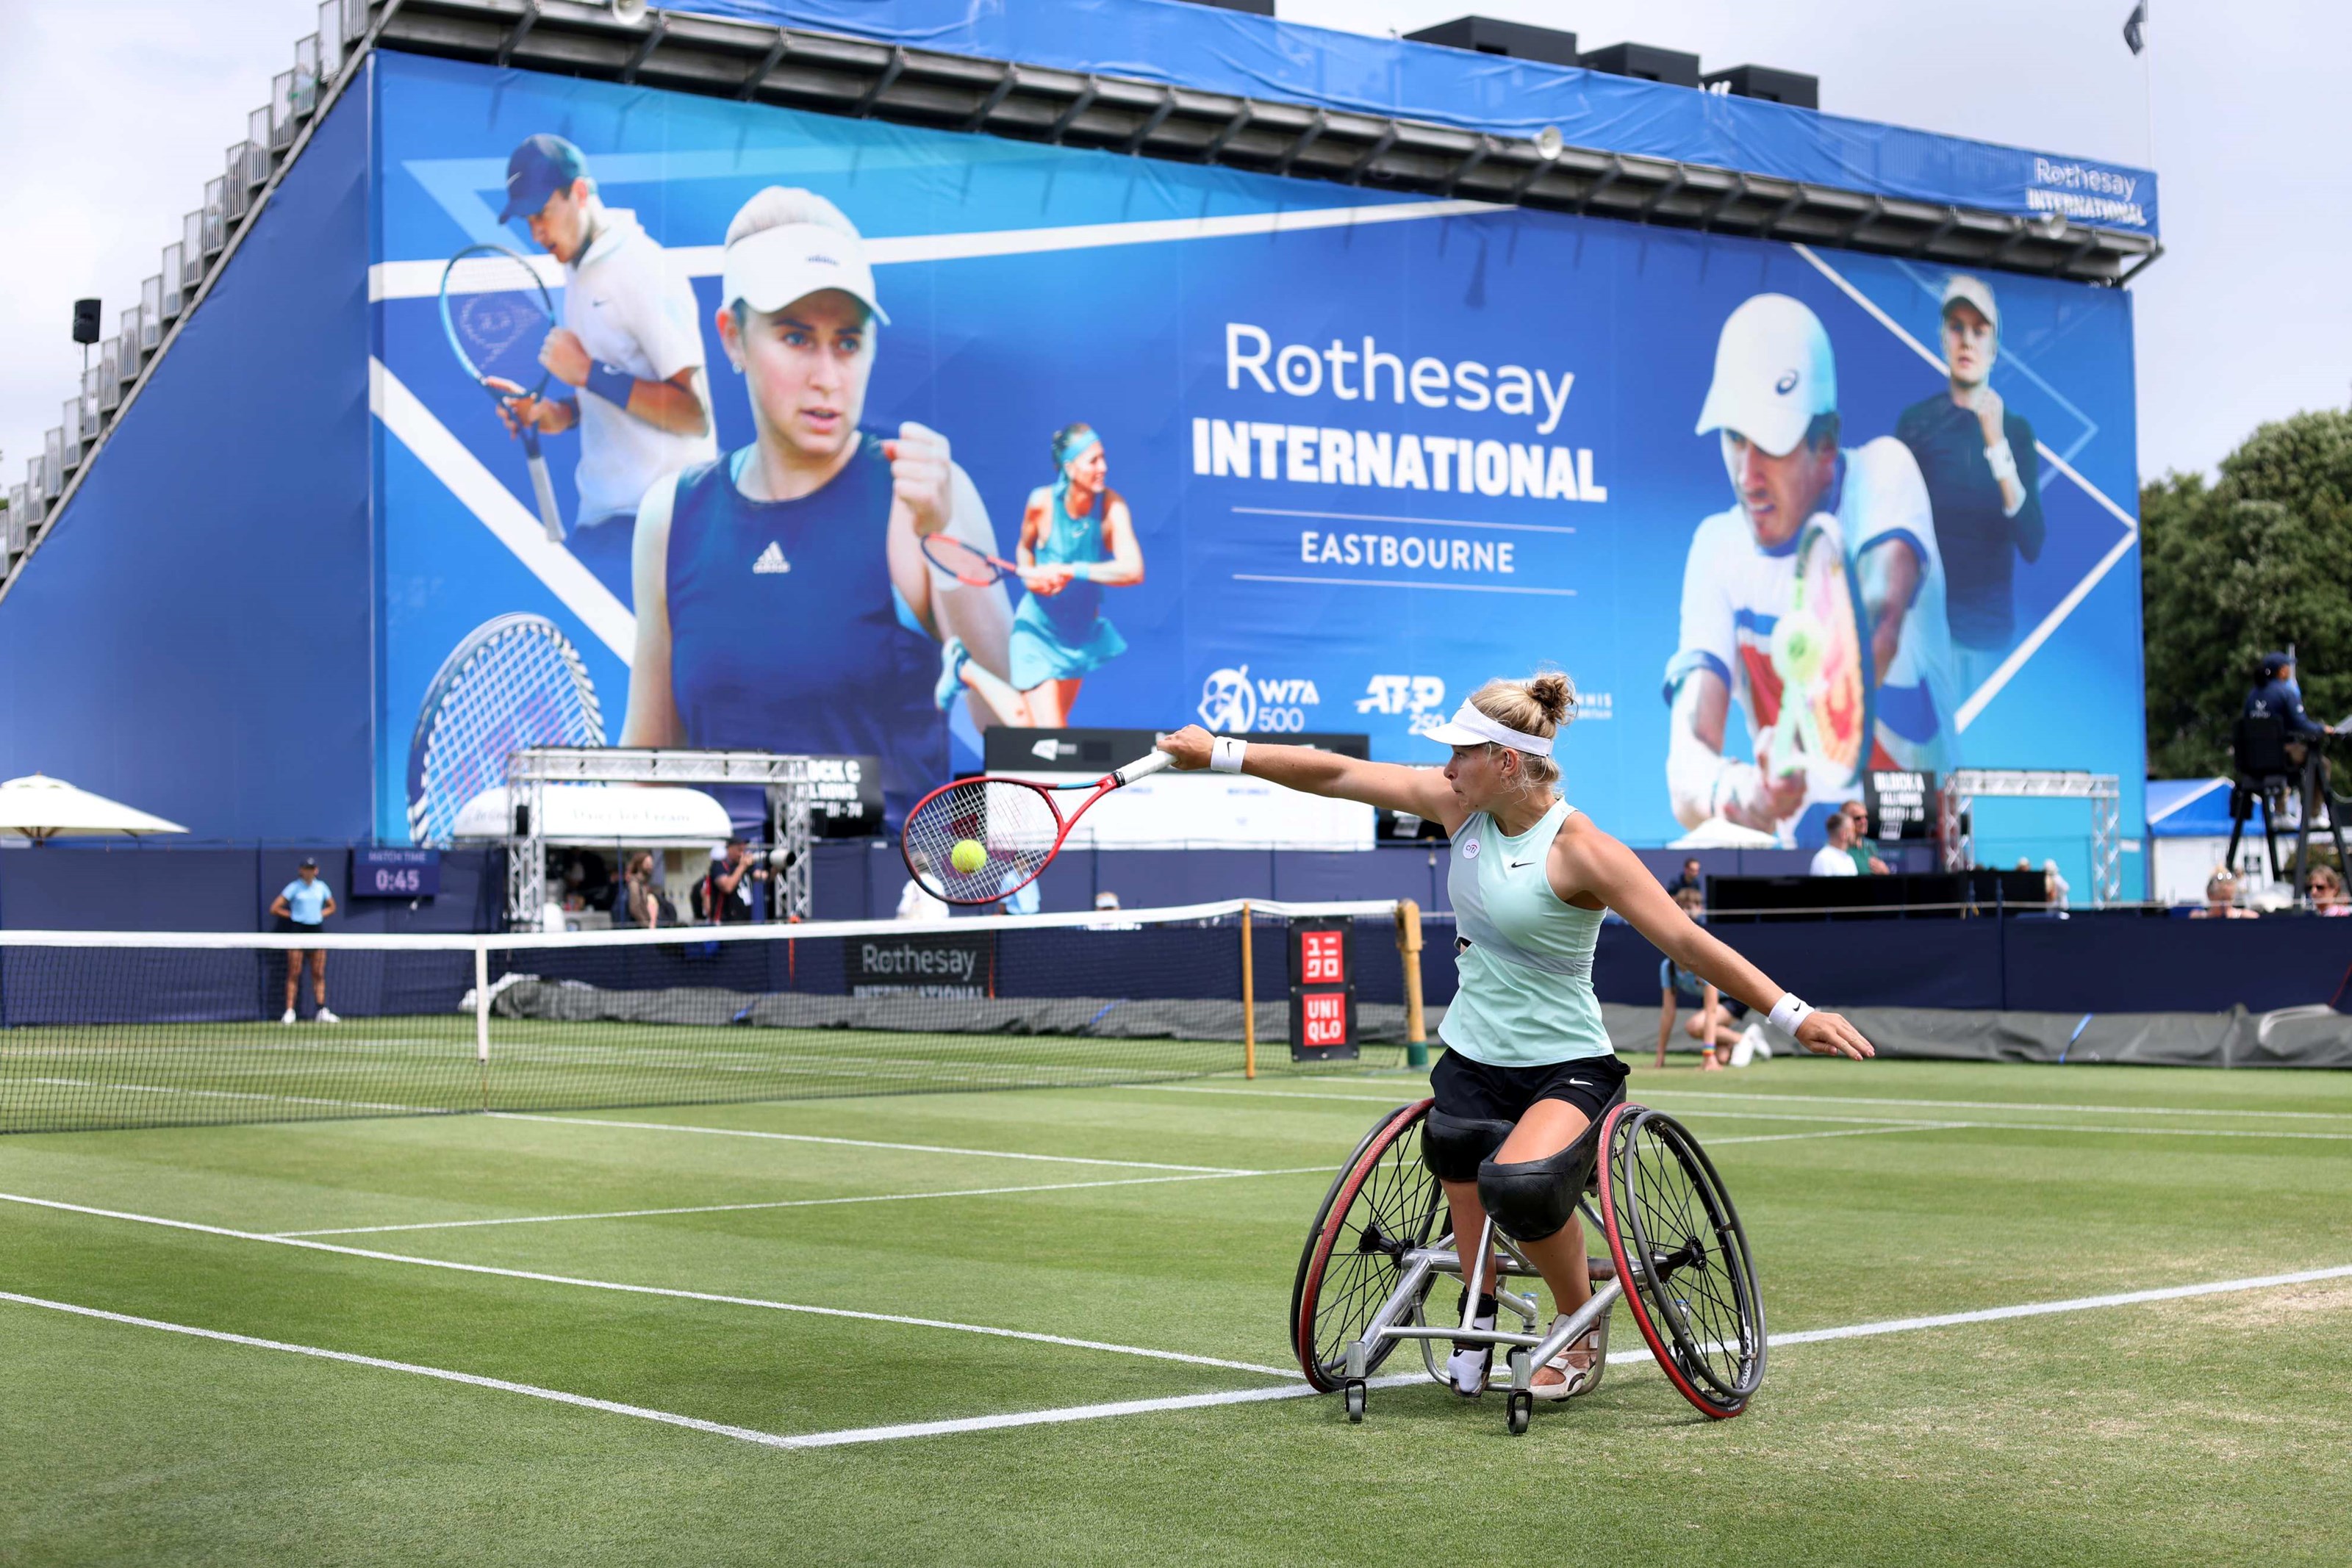 Rothesay International Eastbourne 2022 Daily updates & results LTA